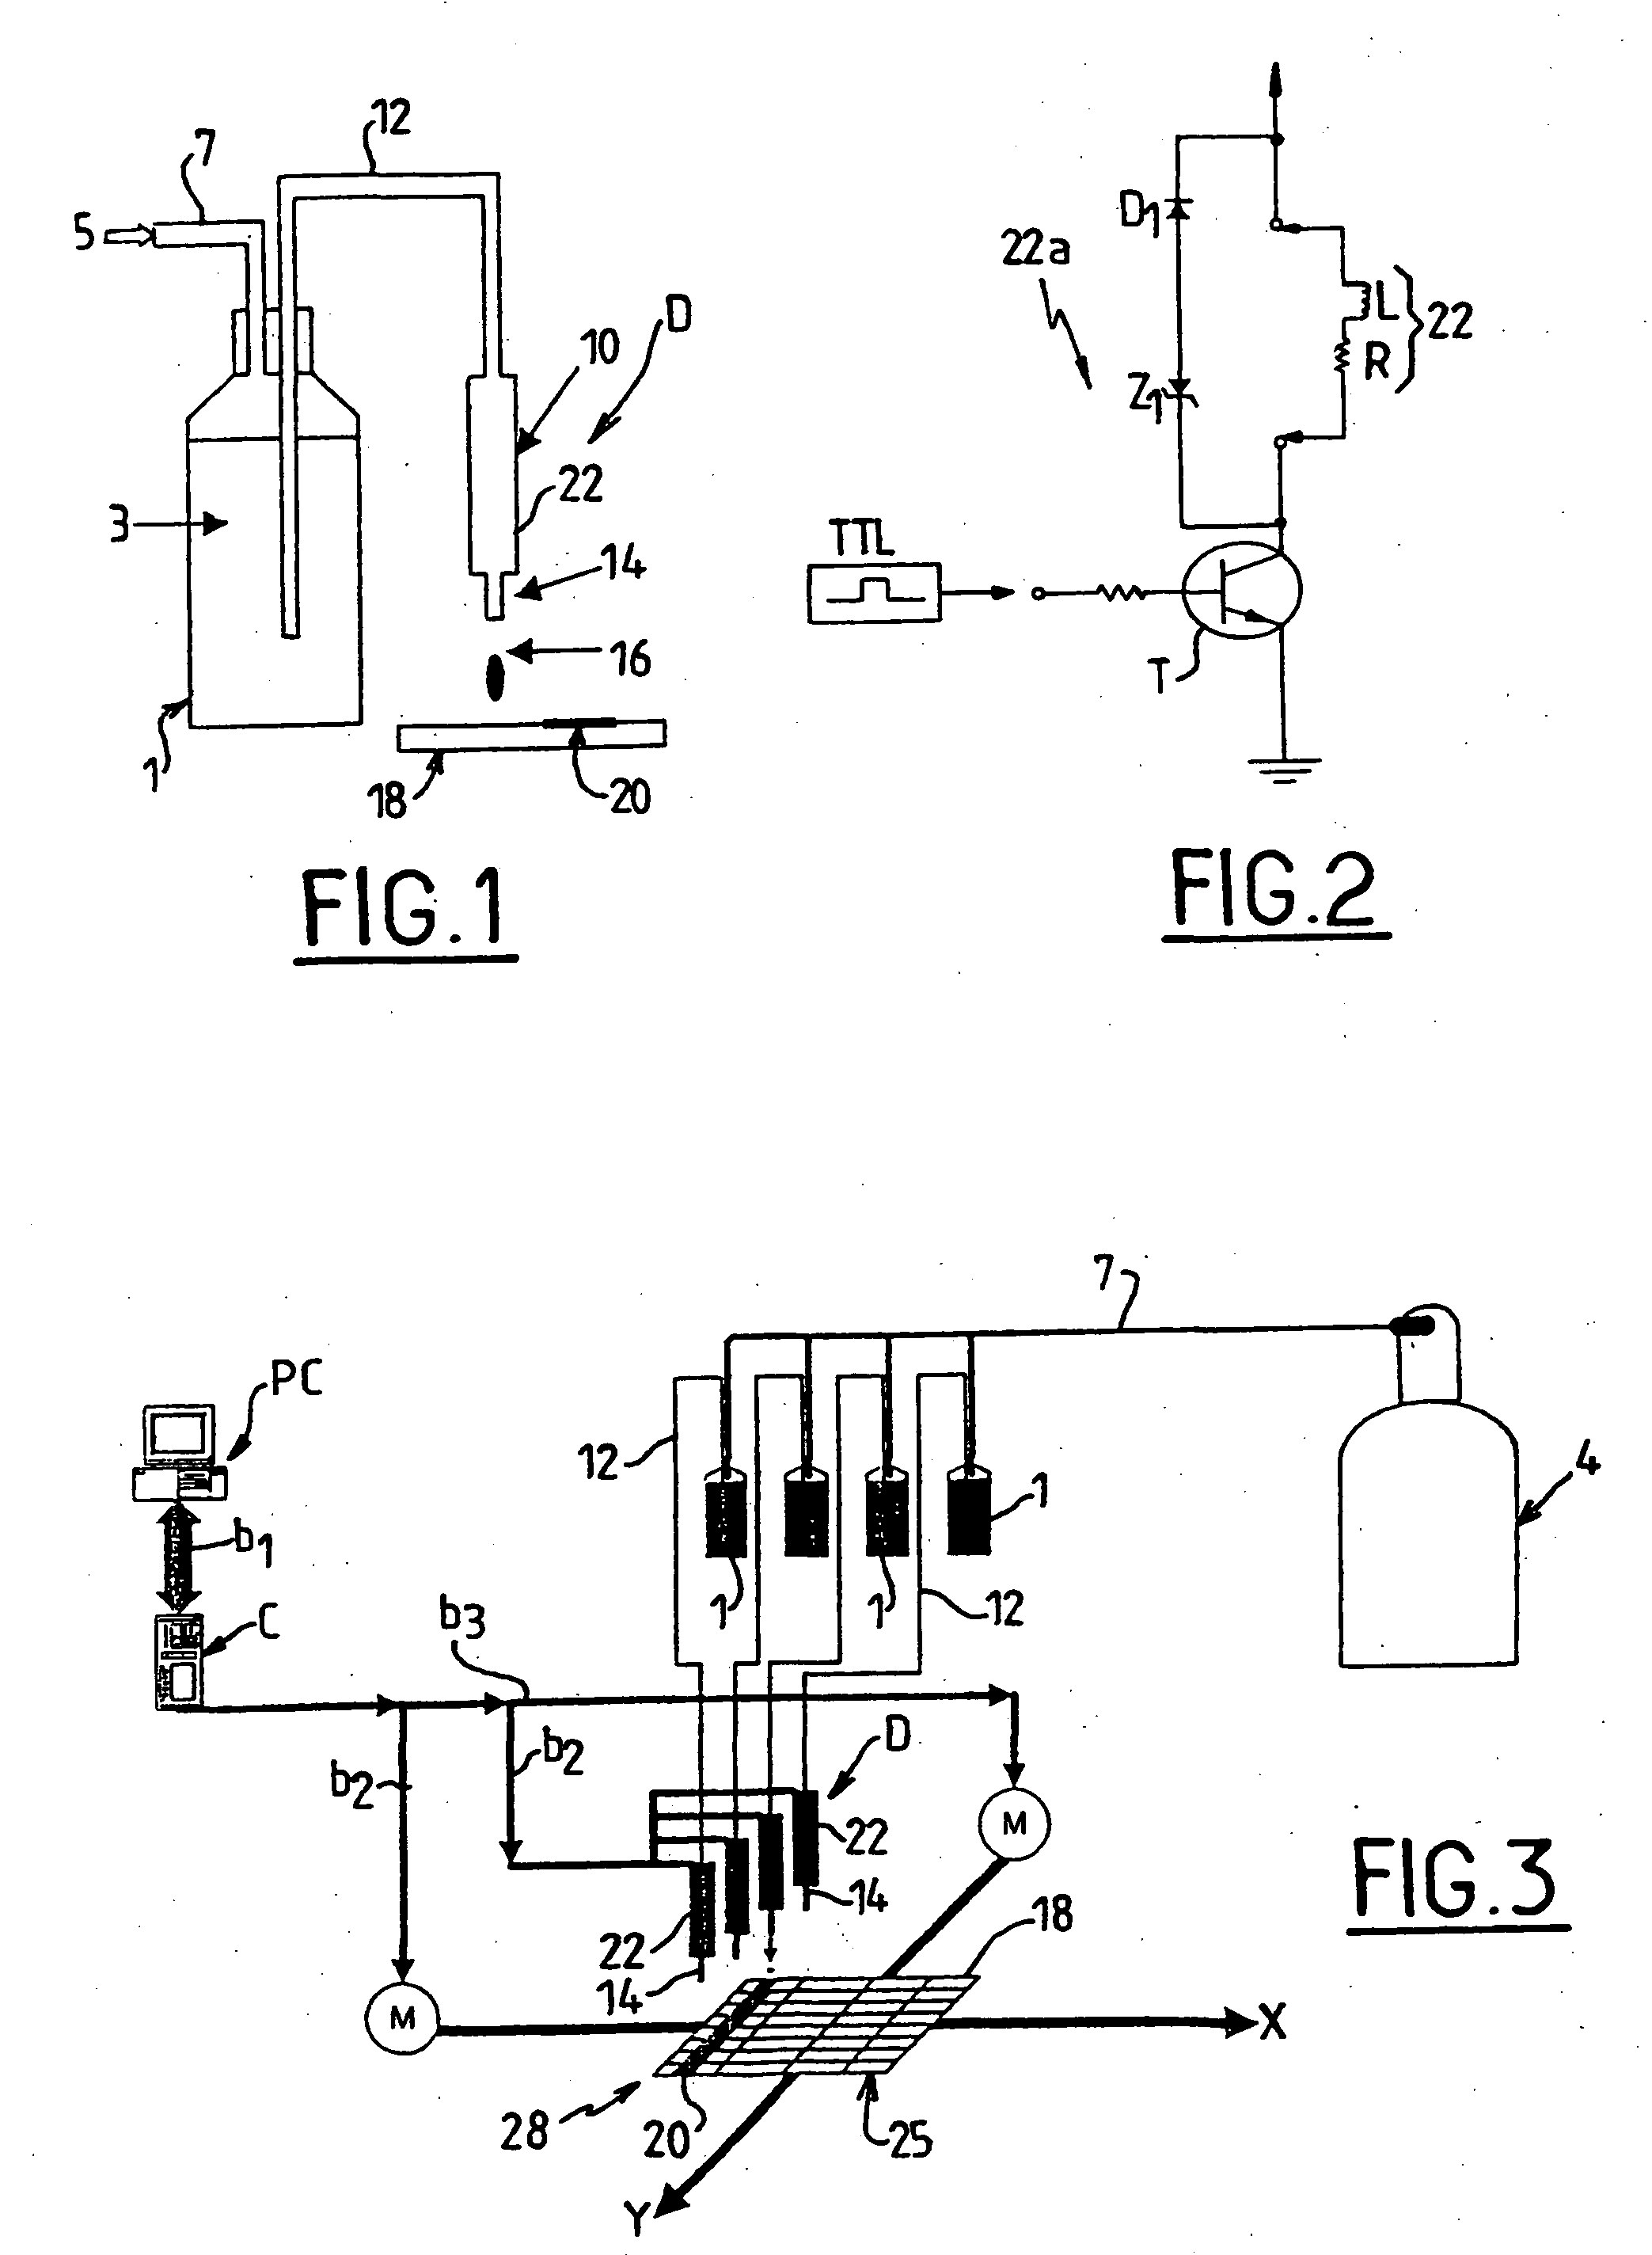 Method and a machine for ex situ fabrication of low and medium integration biochip arrays